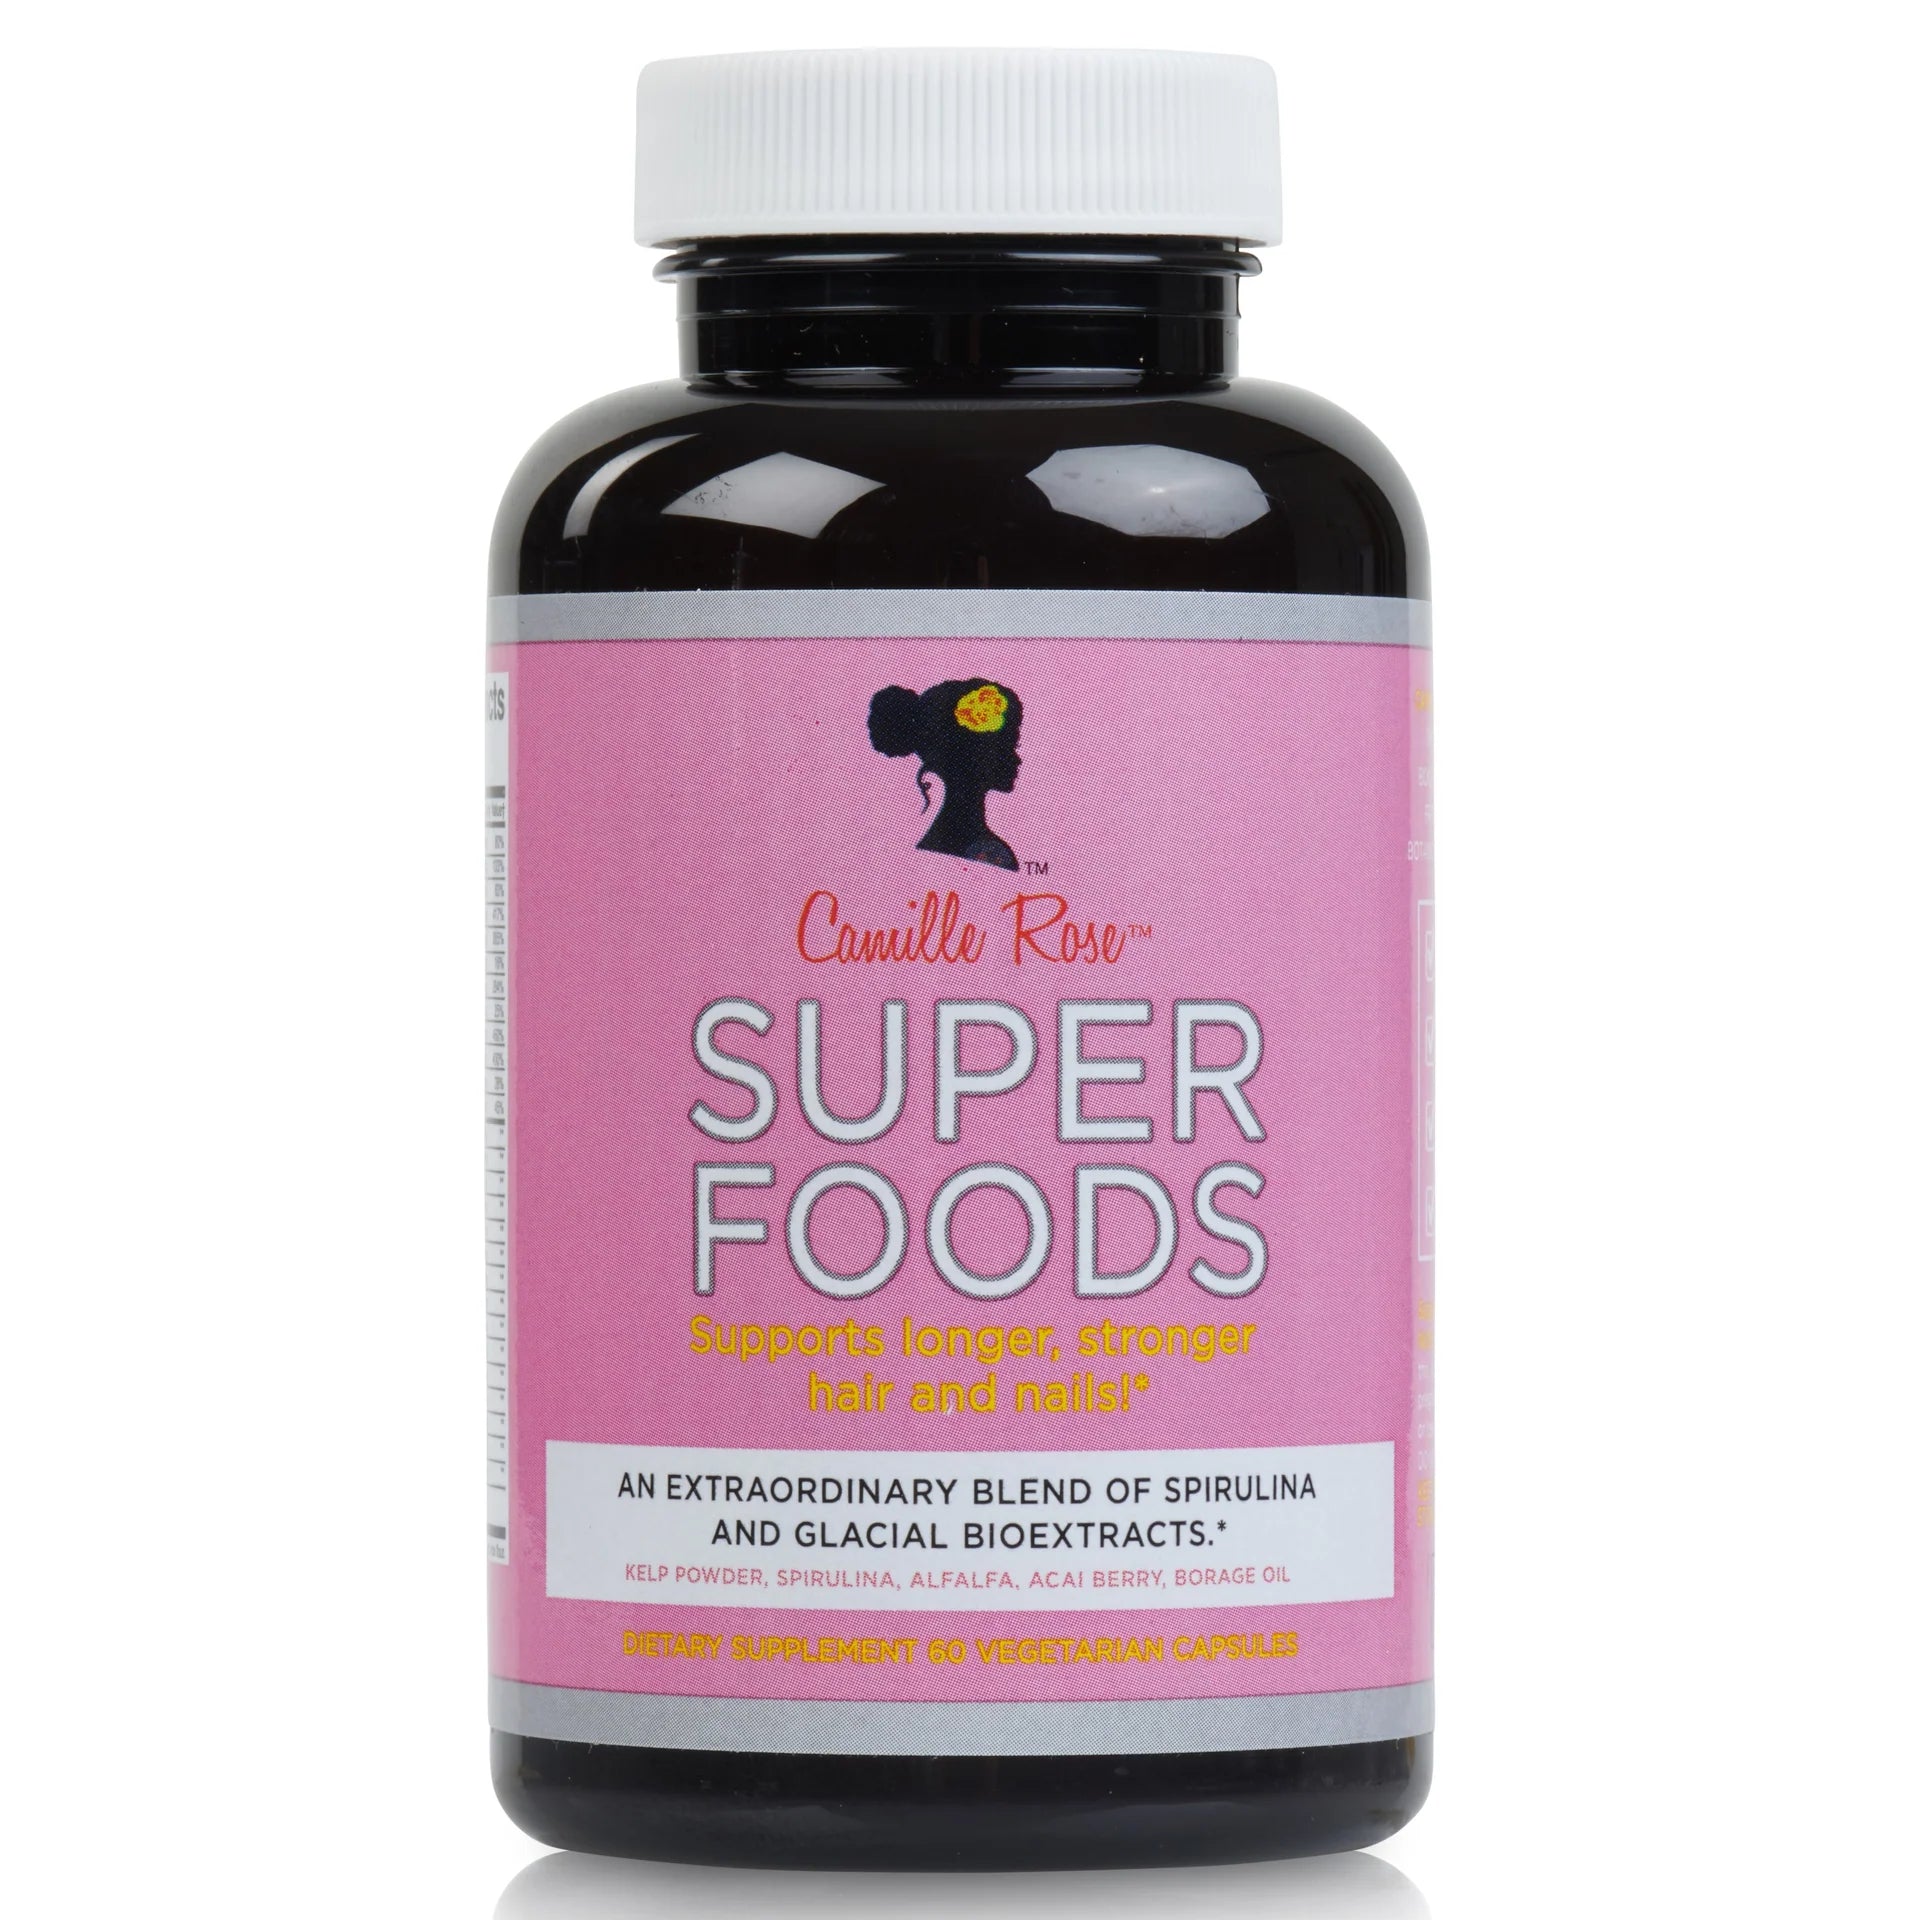 Superfood supplement for hair and nail health